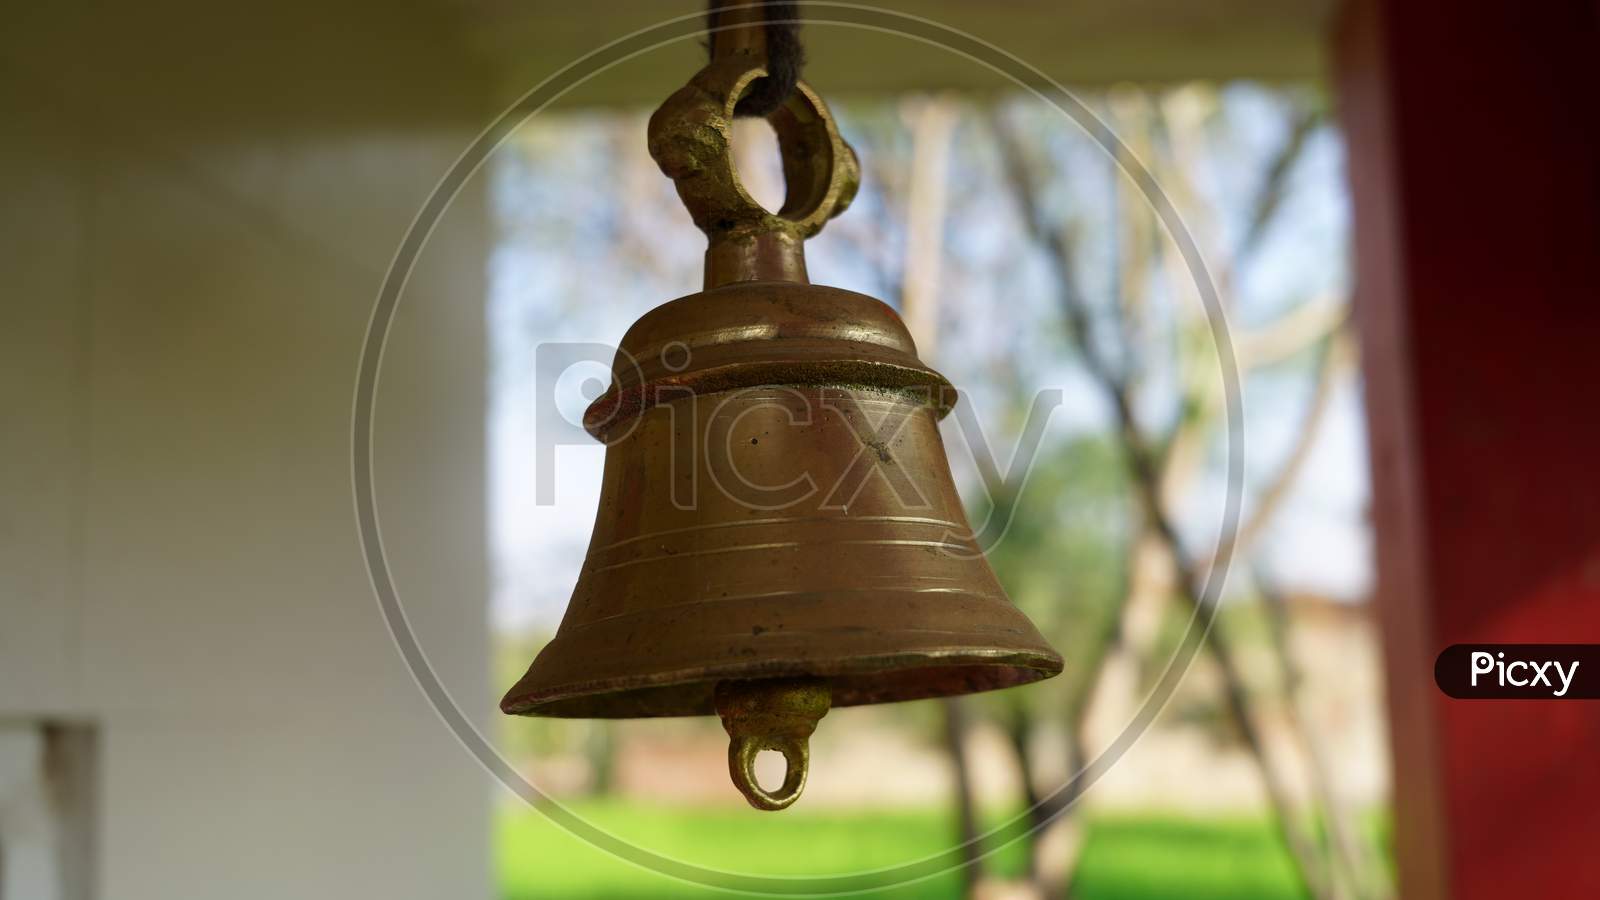 Selective Focus On Temple Ring With Blurred Background. Brass Temple Ghanta Or Bell For Sound Vibrations In Hindu Temple.